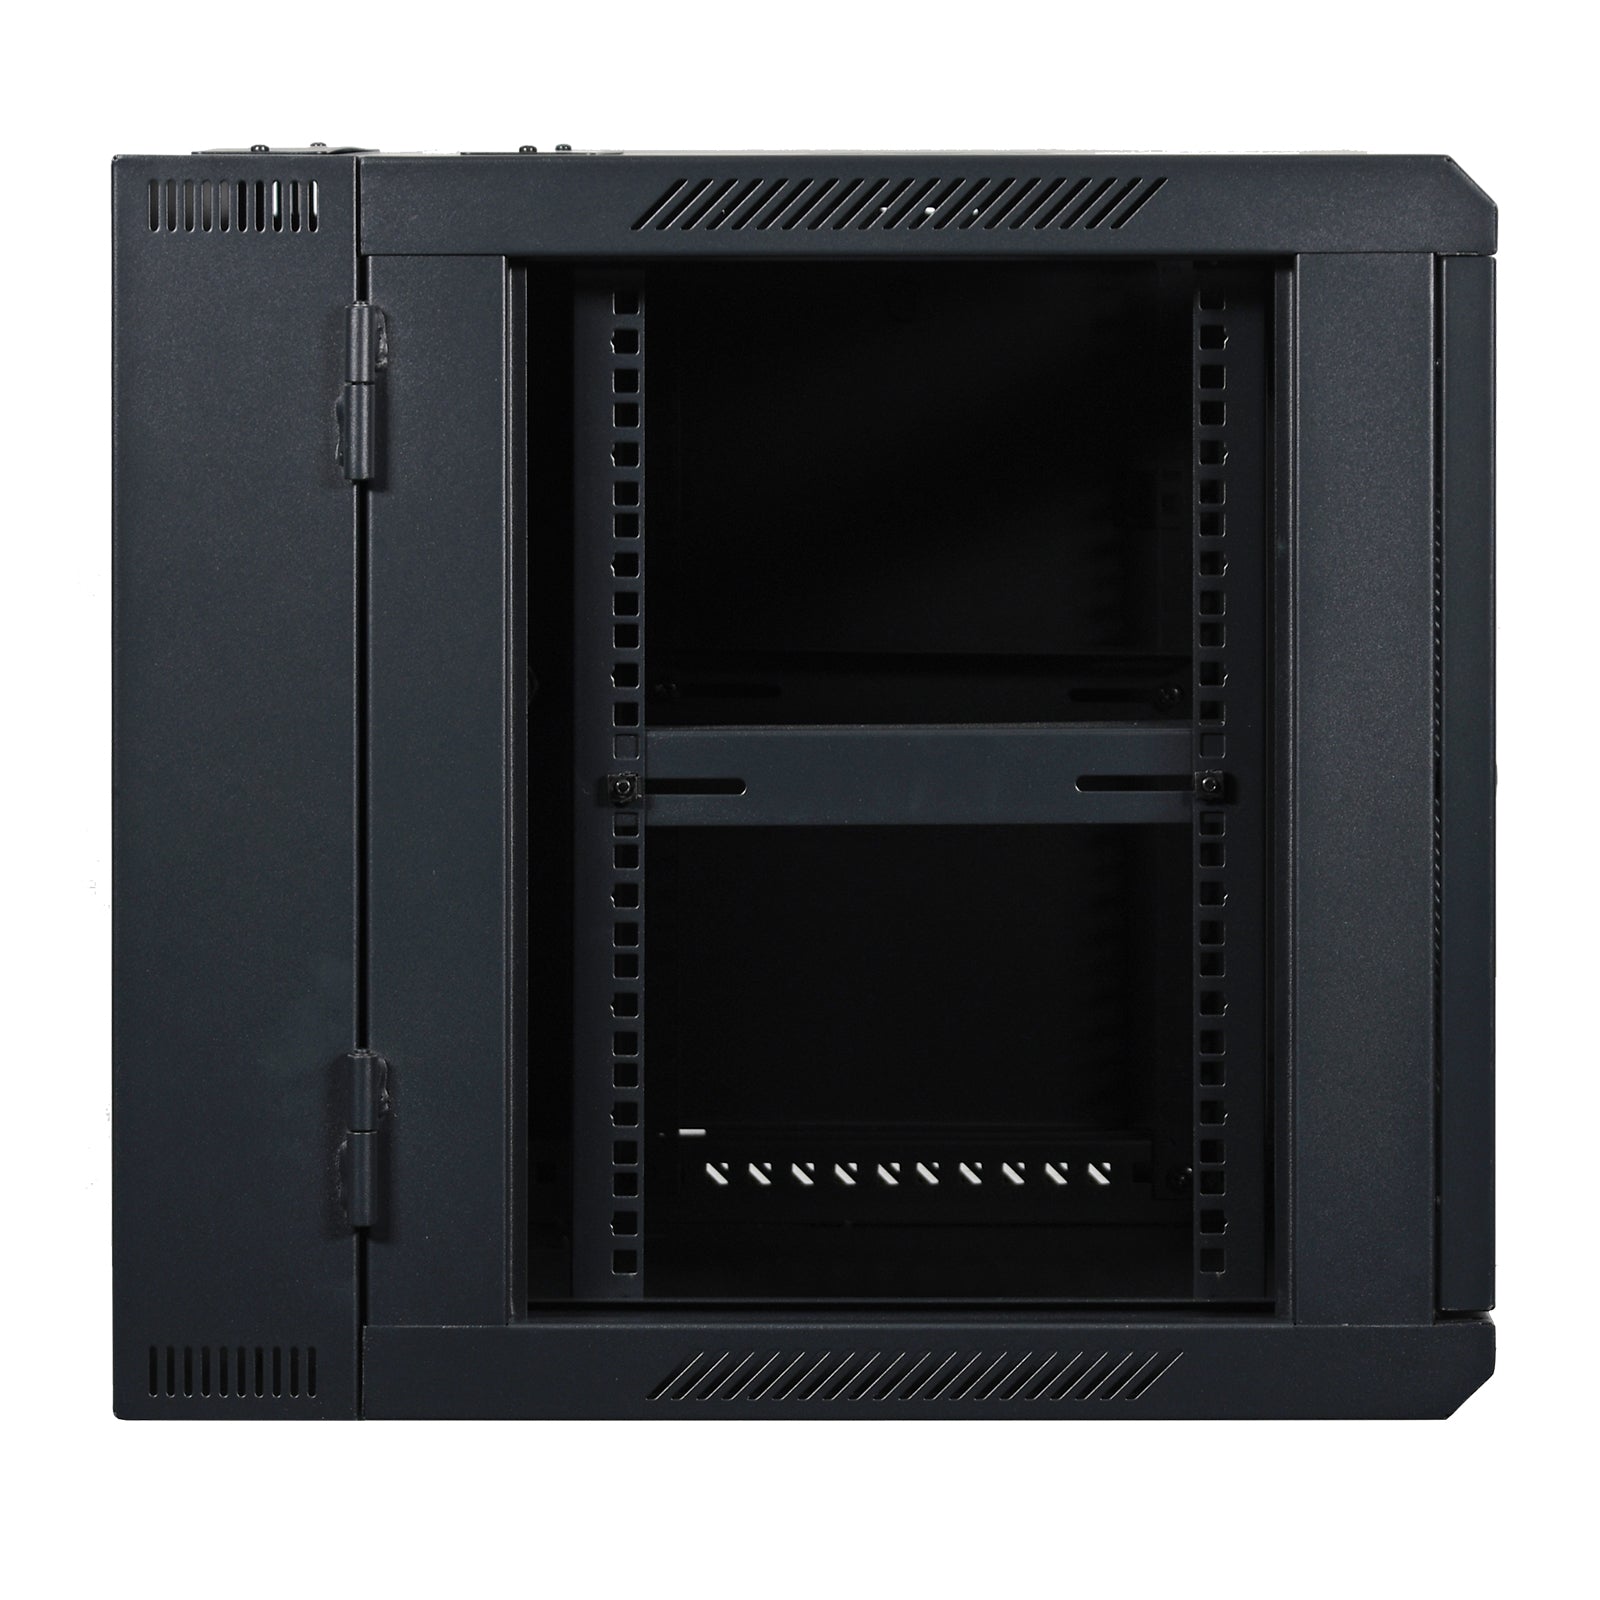 Aeons SB Seires 9U Wall-Mount Network Cabinet, Hinged Swing-Out, Switch-Depth, Vented Door